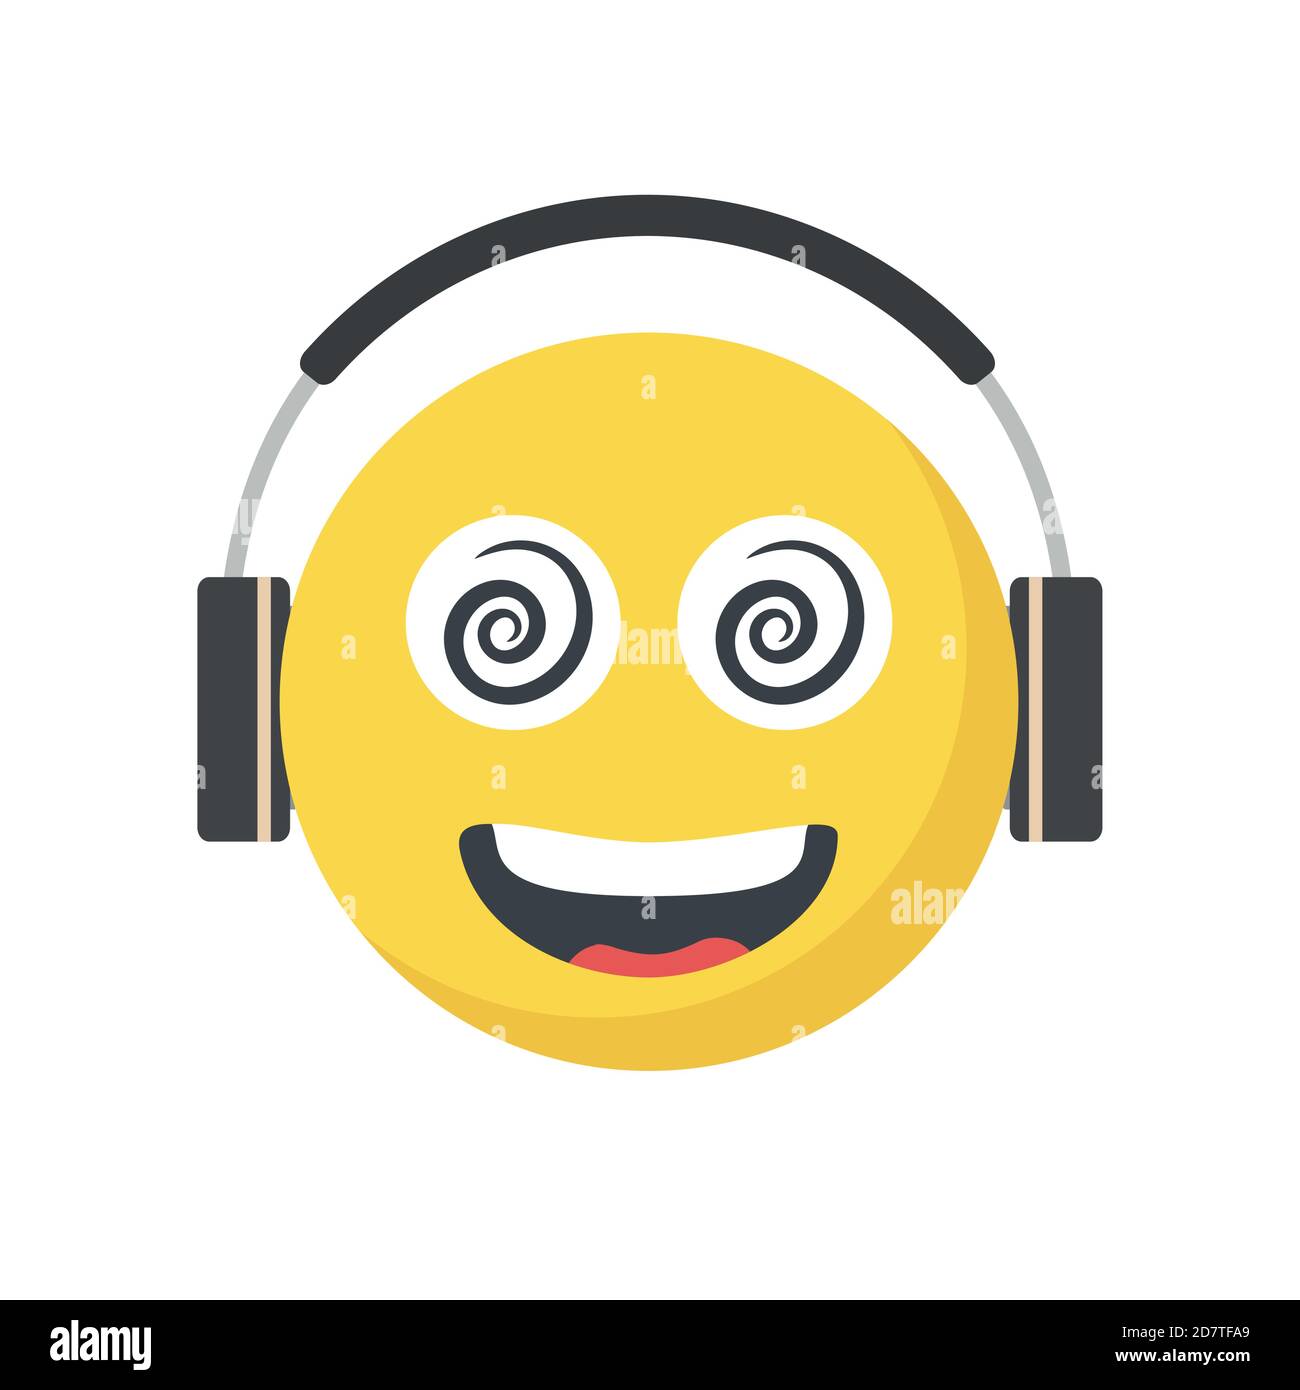 Smiling face emoji with large Ear Headphones, Stock Vector